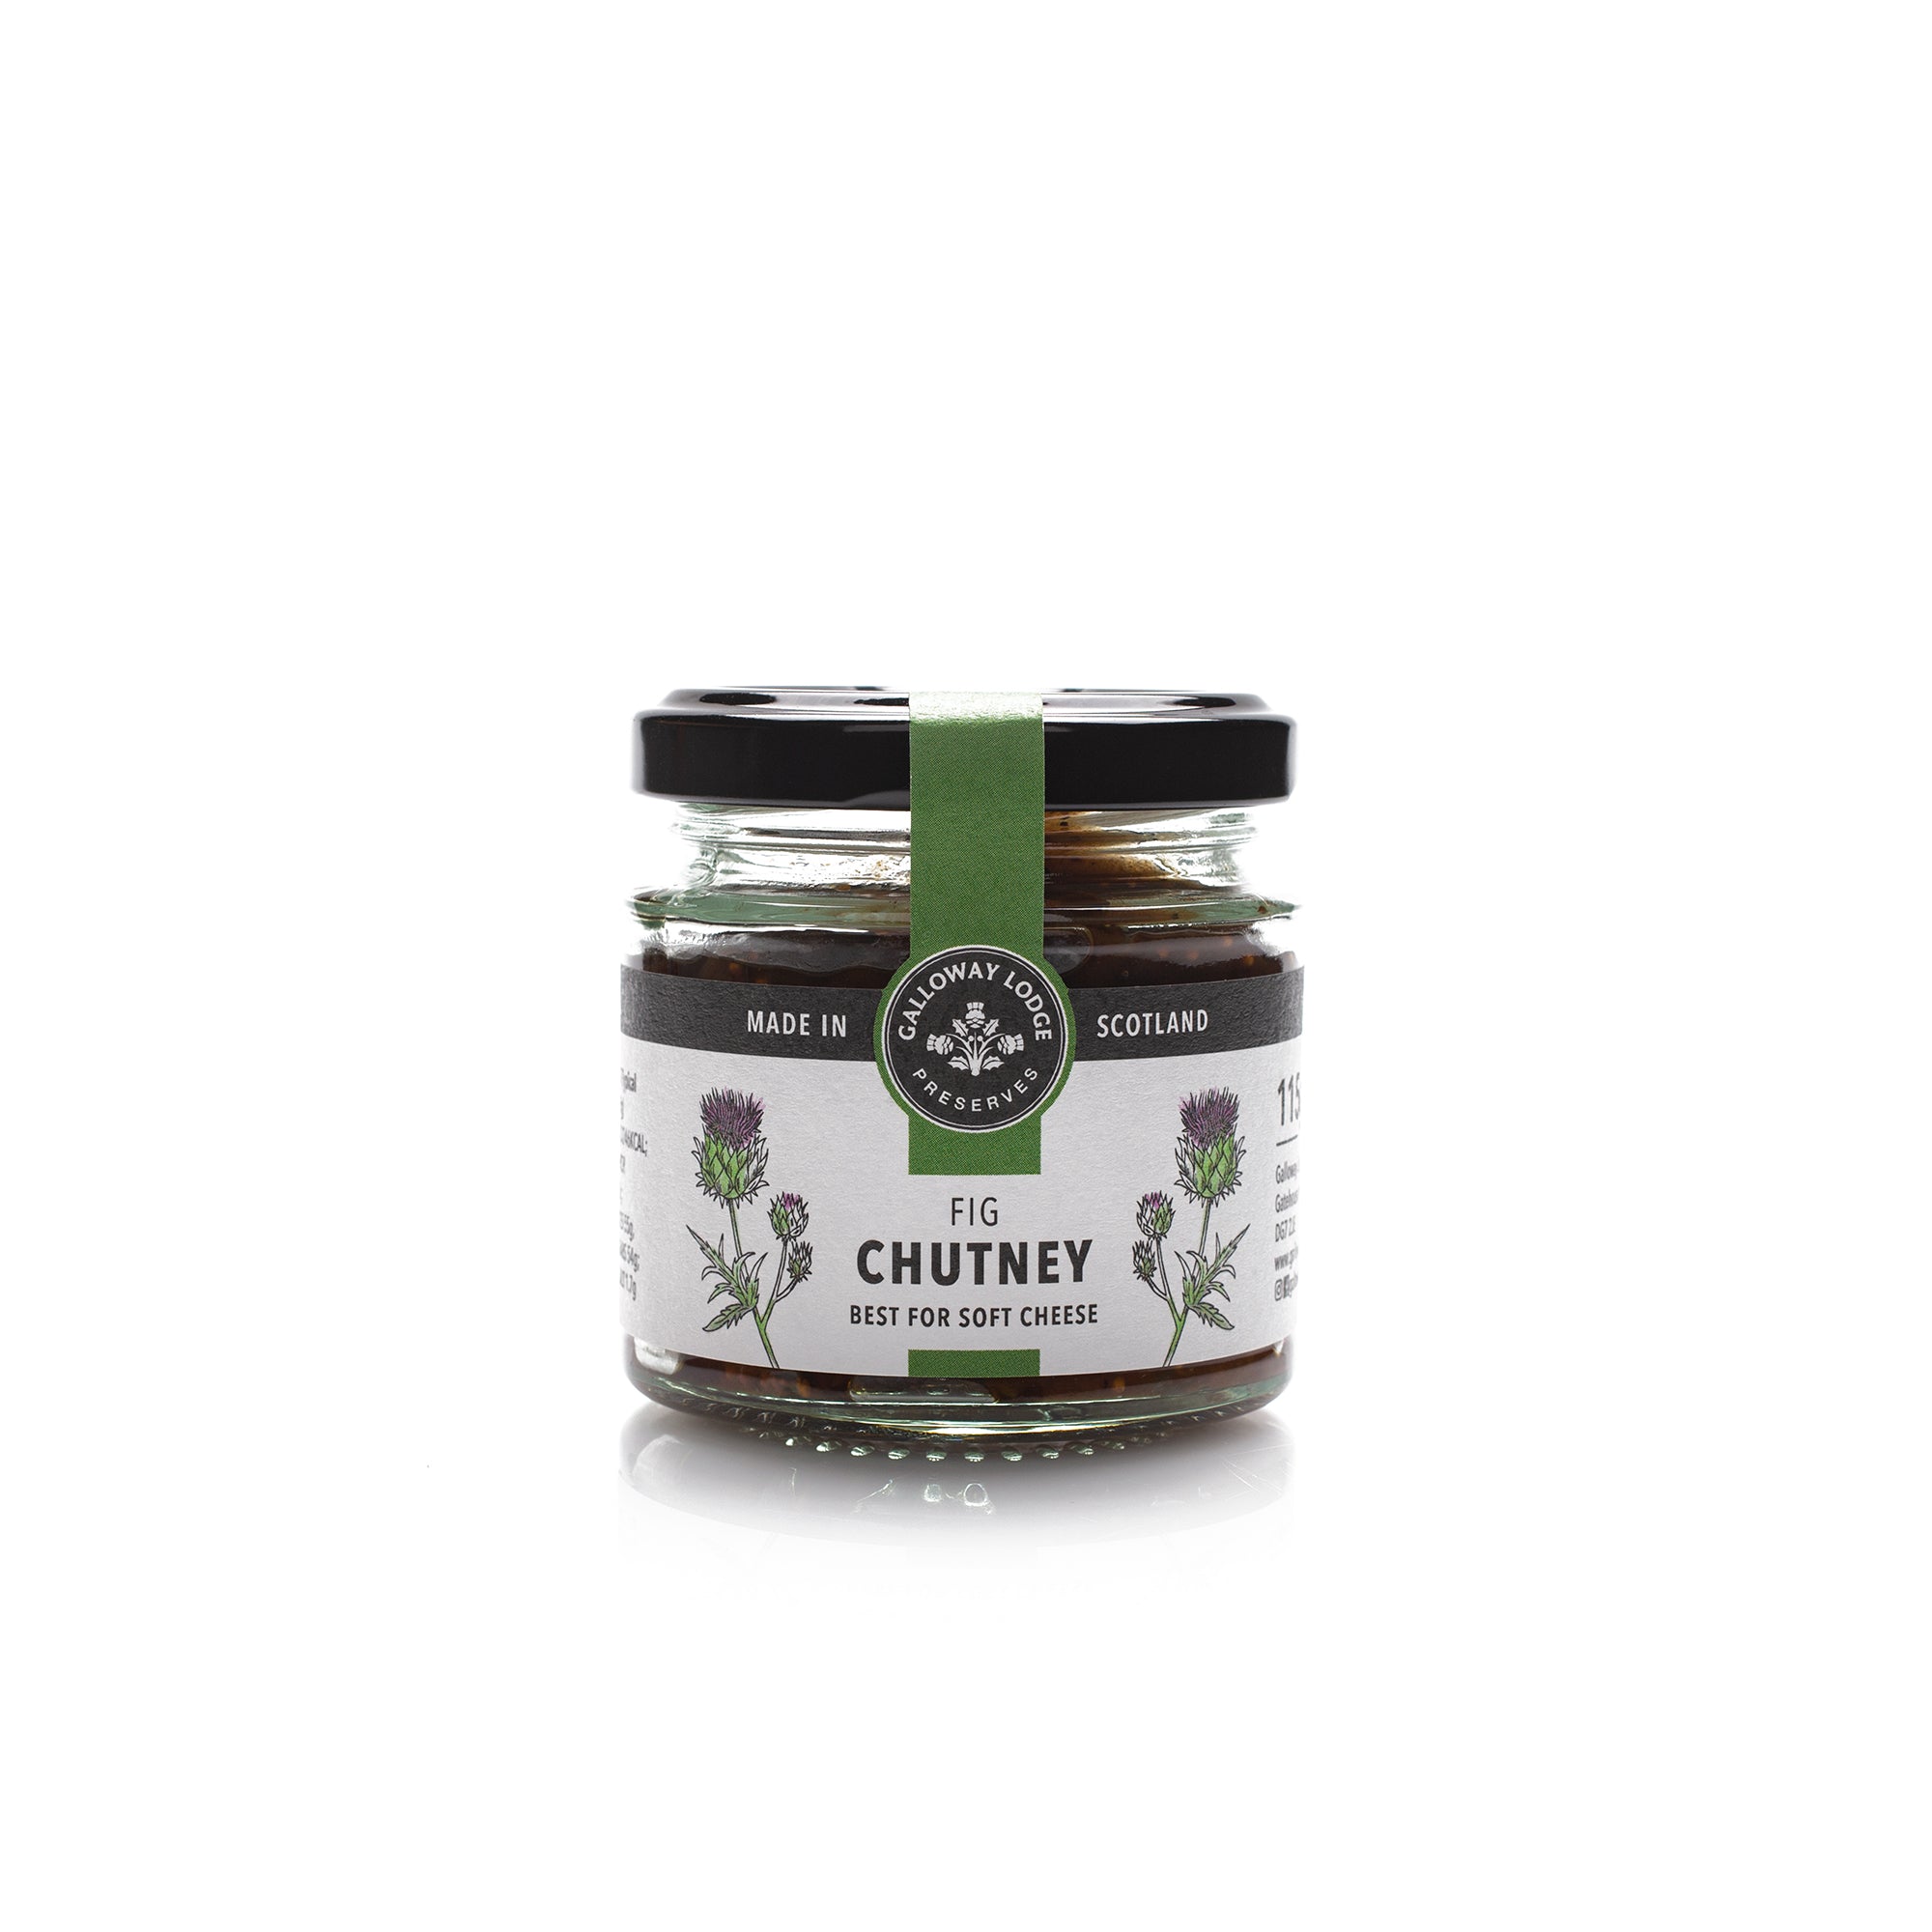 Fig Chutney (115g) - Galloway Lodge, Dumfries and Galloway